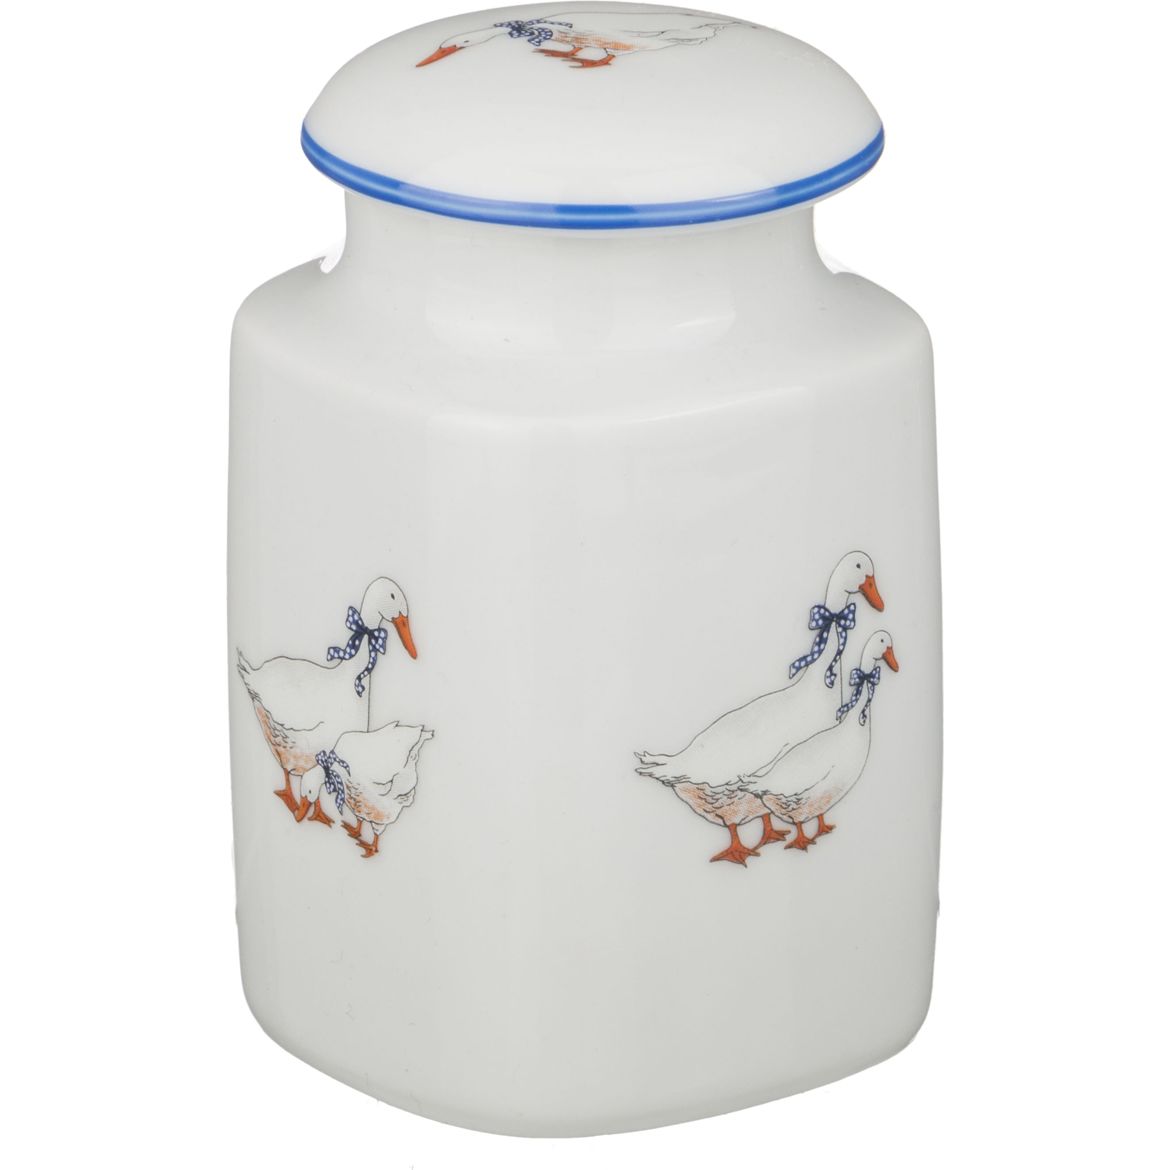    Geese porcelain s